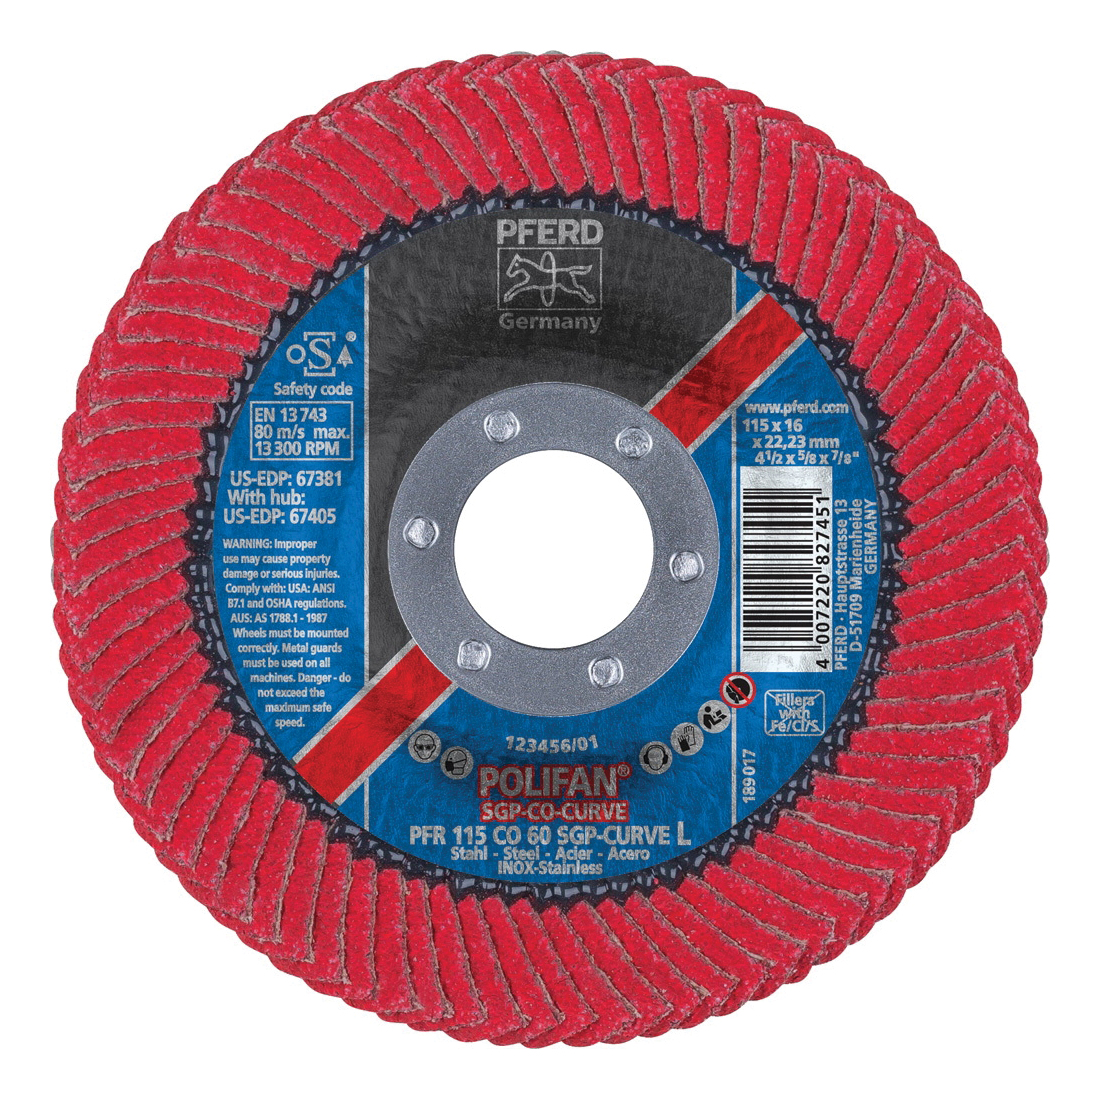 PFERD Polifan® 67381 Special Line SGP CO-CURVE Unthreaded Coated Abrasive Flap Disc, 4-1/2 in Dia, 7/8 in Center Hole, 60 Grit, Ceramic Oxide Abrasive, Type PFR/Radial Disc